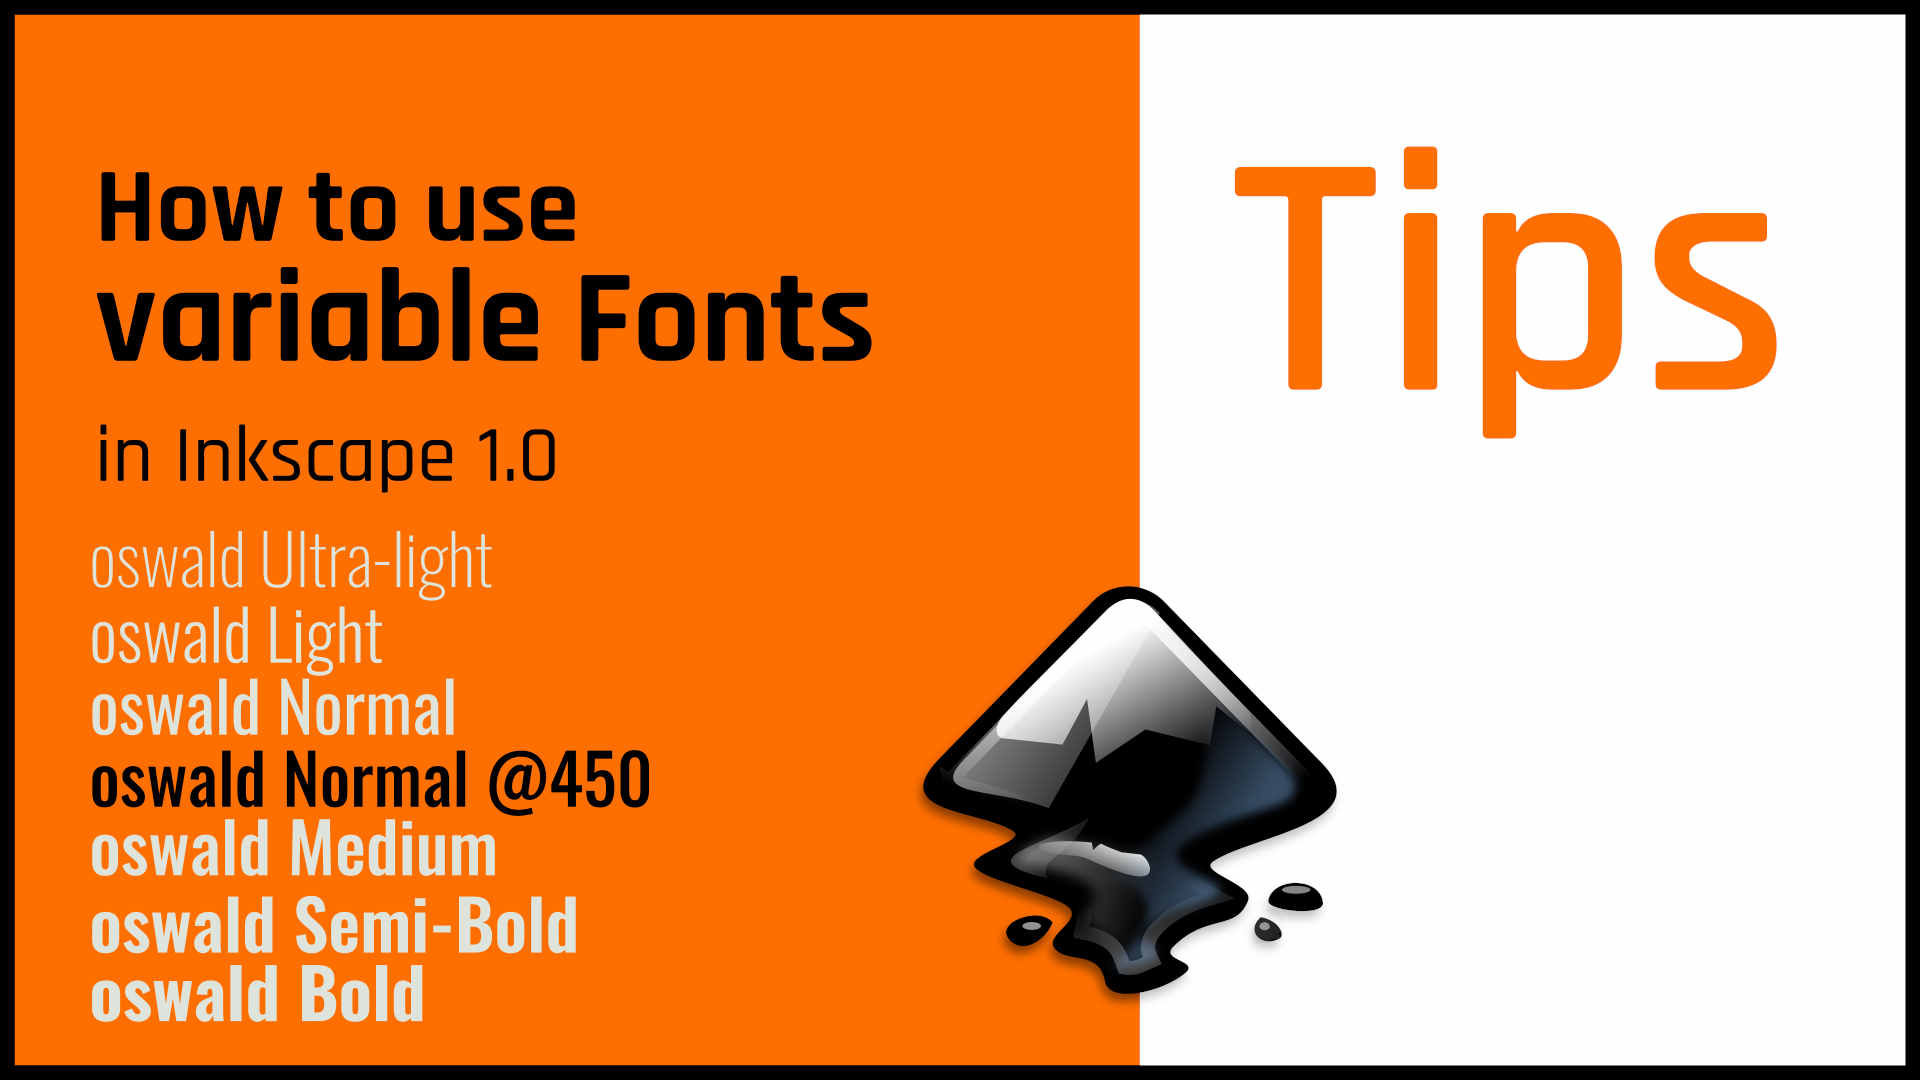 Lire How to use Variable Fonts in Inkscape 1.0 in few steps